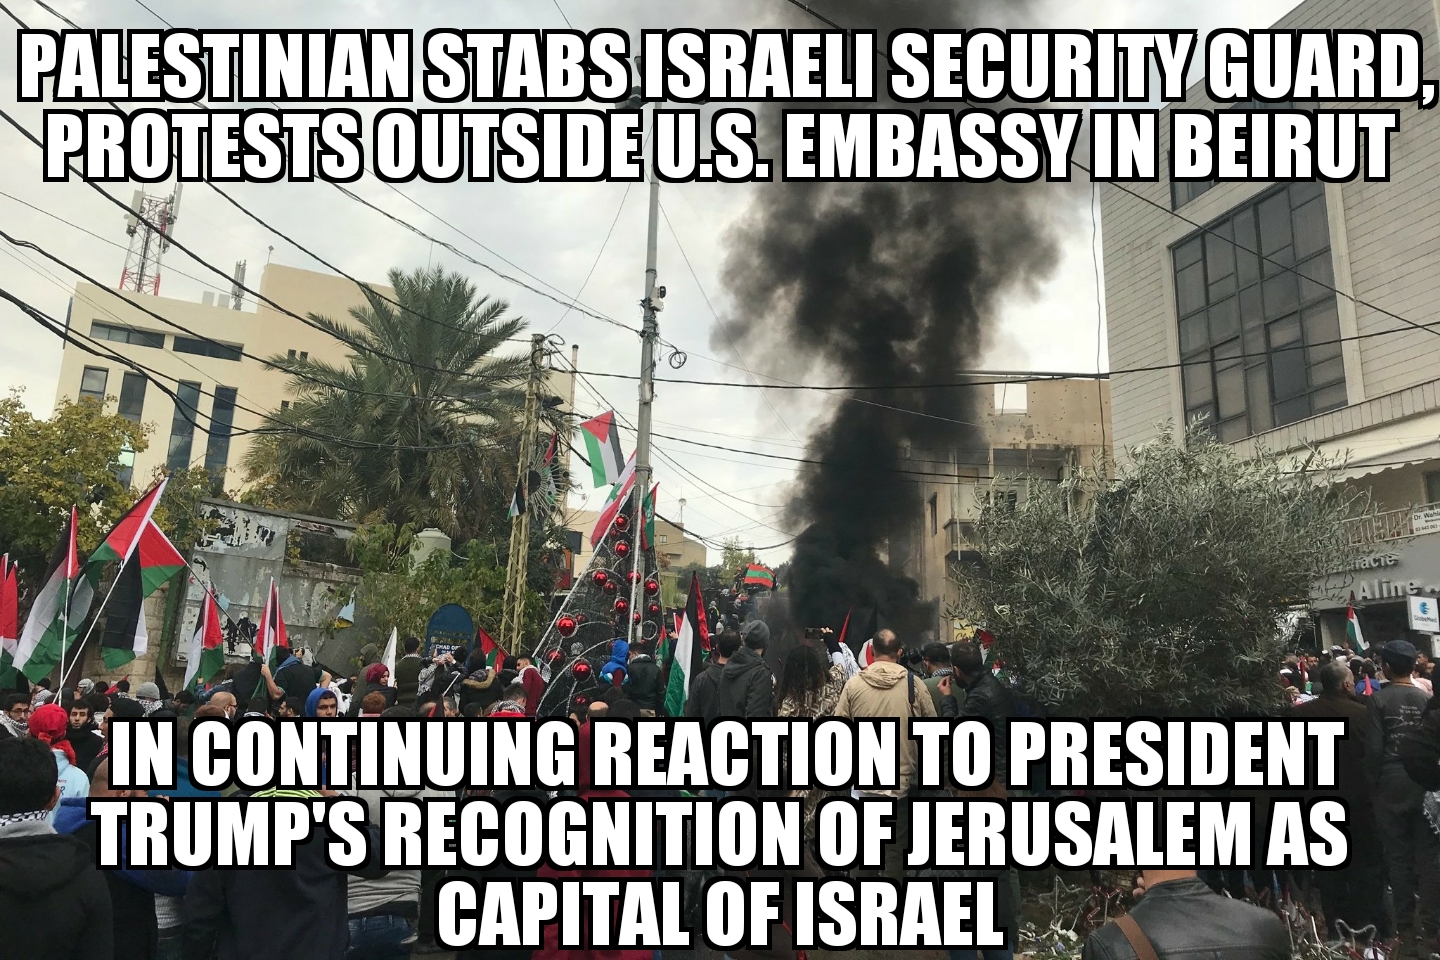 Palestinian stabs Israeli guard, protests outside U.S. embassy in Beirut